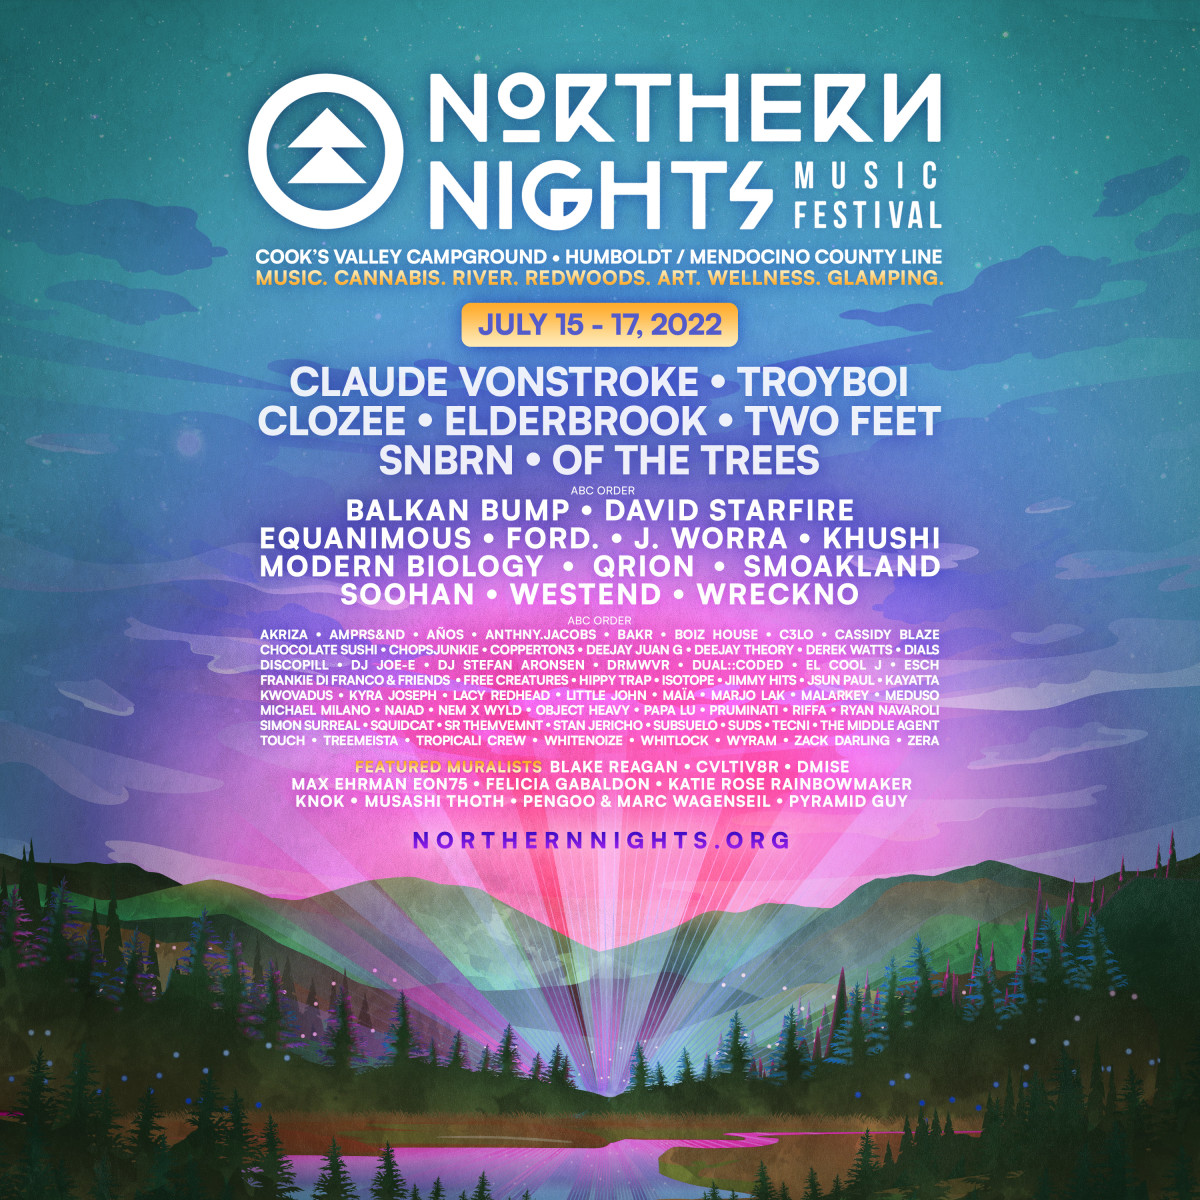 Northern Nights 2022 lineup featuring TroyBoi, CloZee, Elderbrook, SNBRN and more.